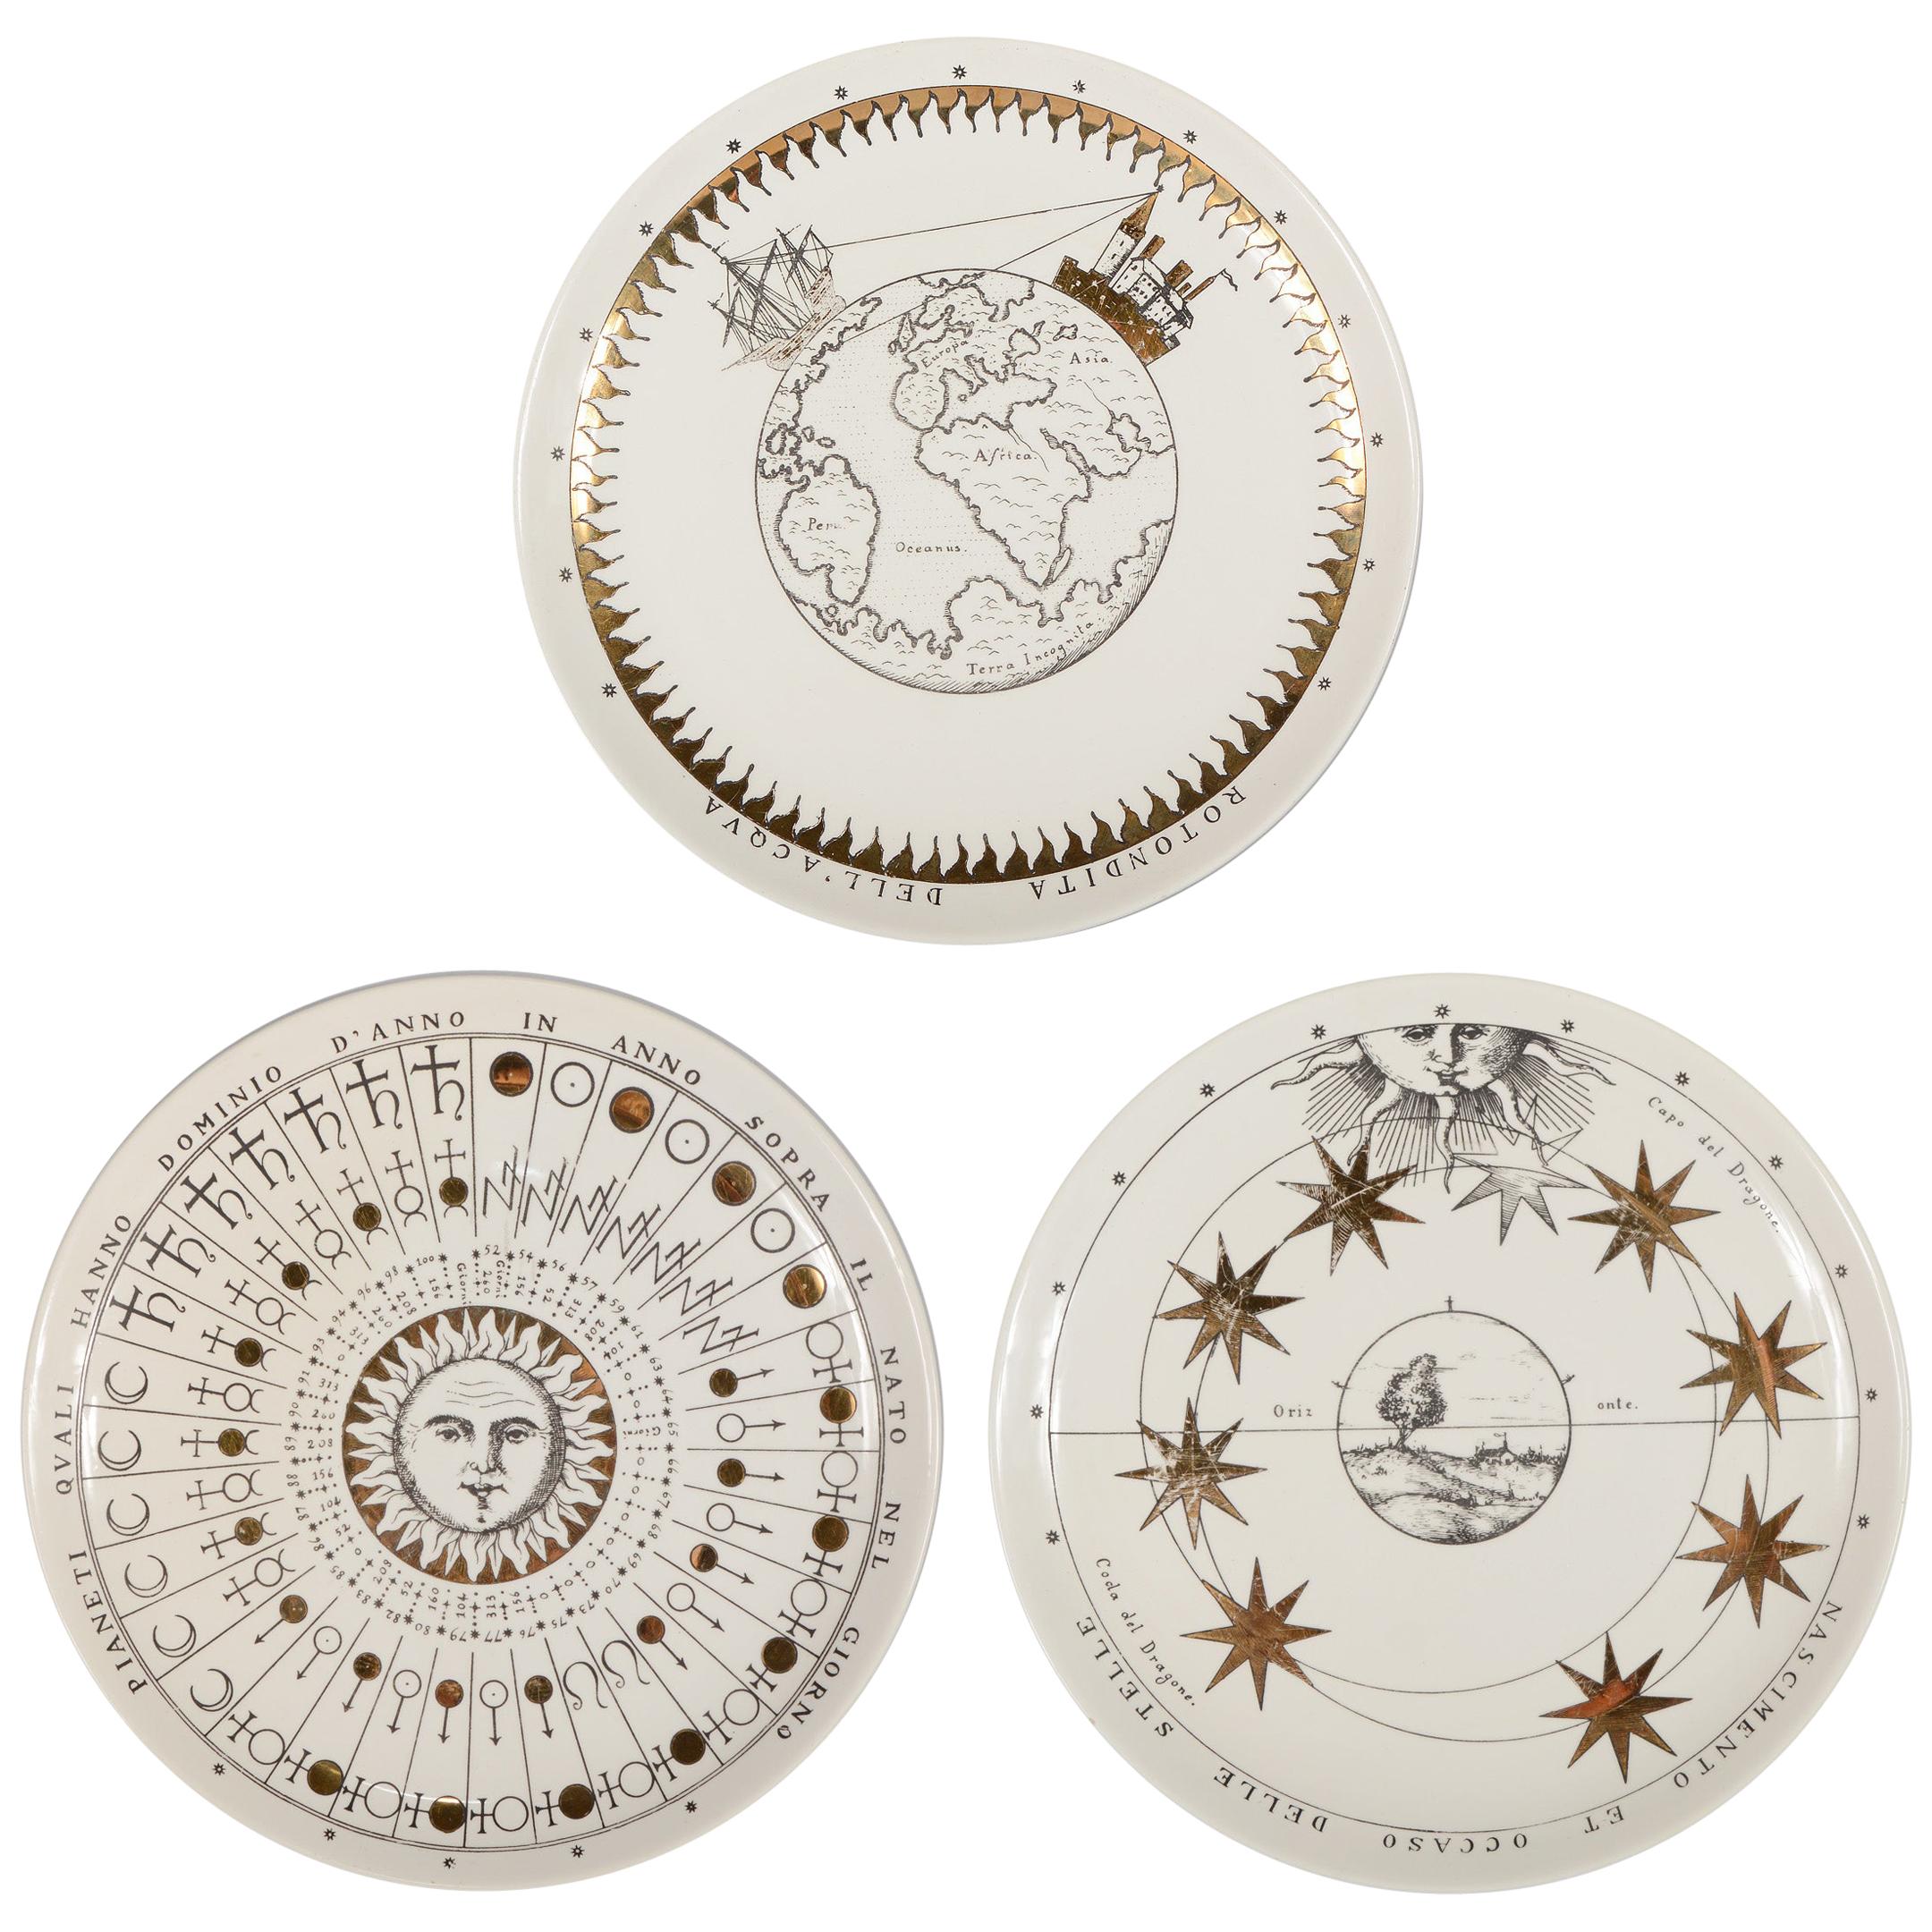 Three Plates from the Astronomici Series by Piero Fornasetti